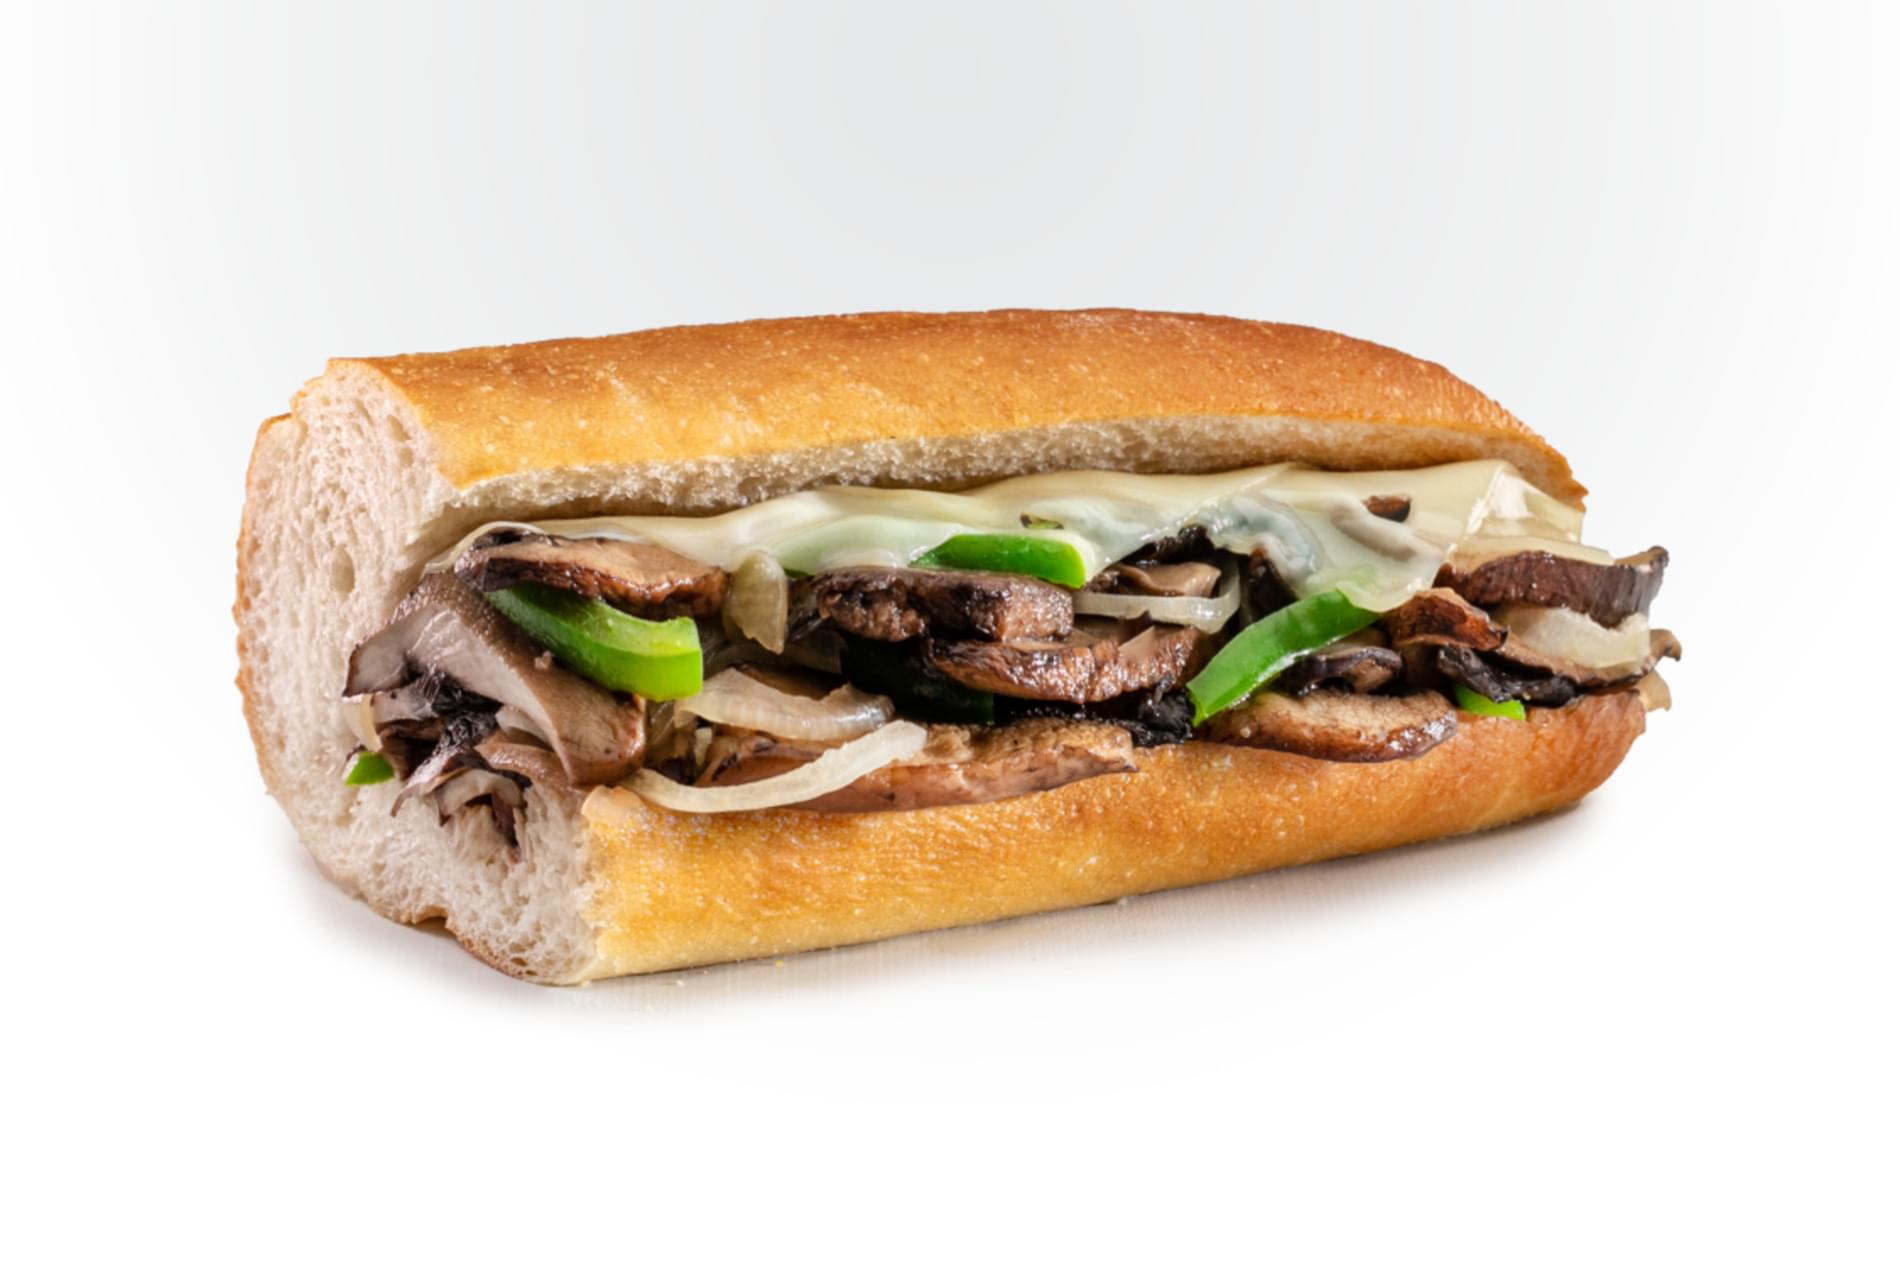 Jersey Mike's Grilled Portabella Mushroom & Swiss Nutrition Facts